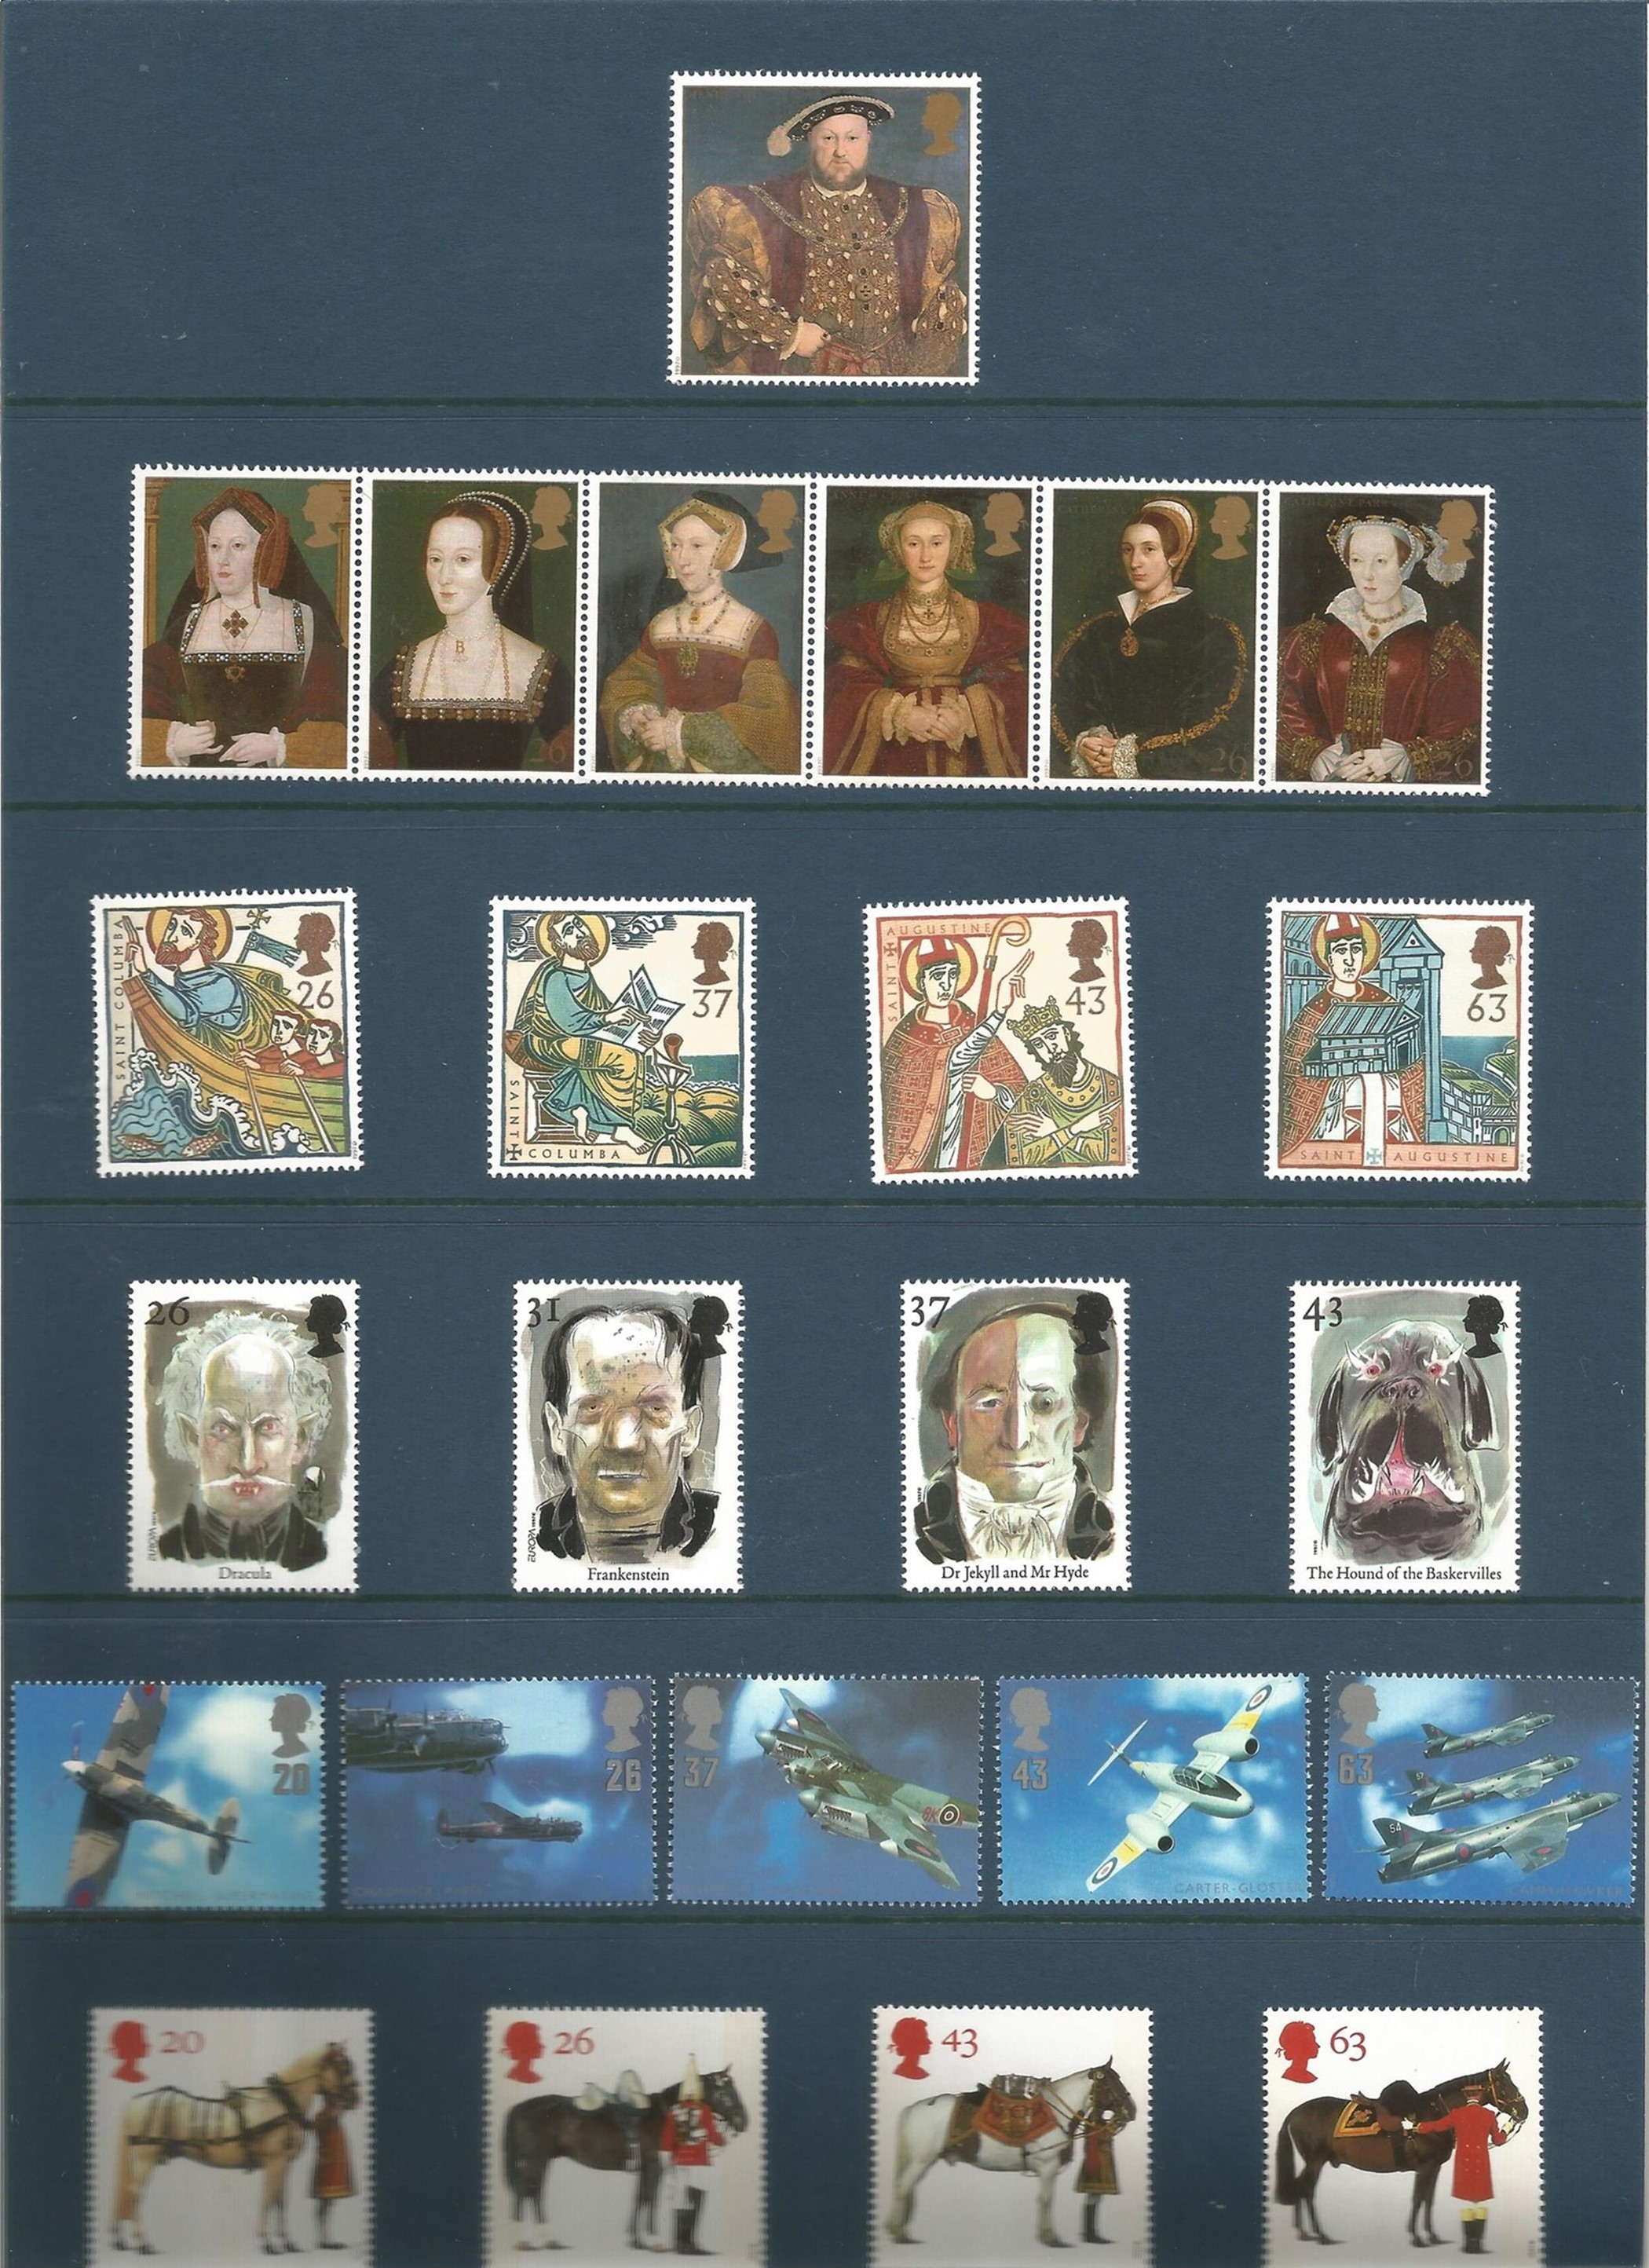 GB Mint Stamps Royal Mail Collectors Year pack 1997, containing all GB Stamps produced for 1997. - Image 2 of 3